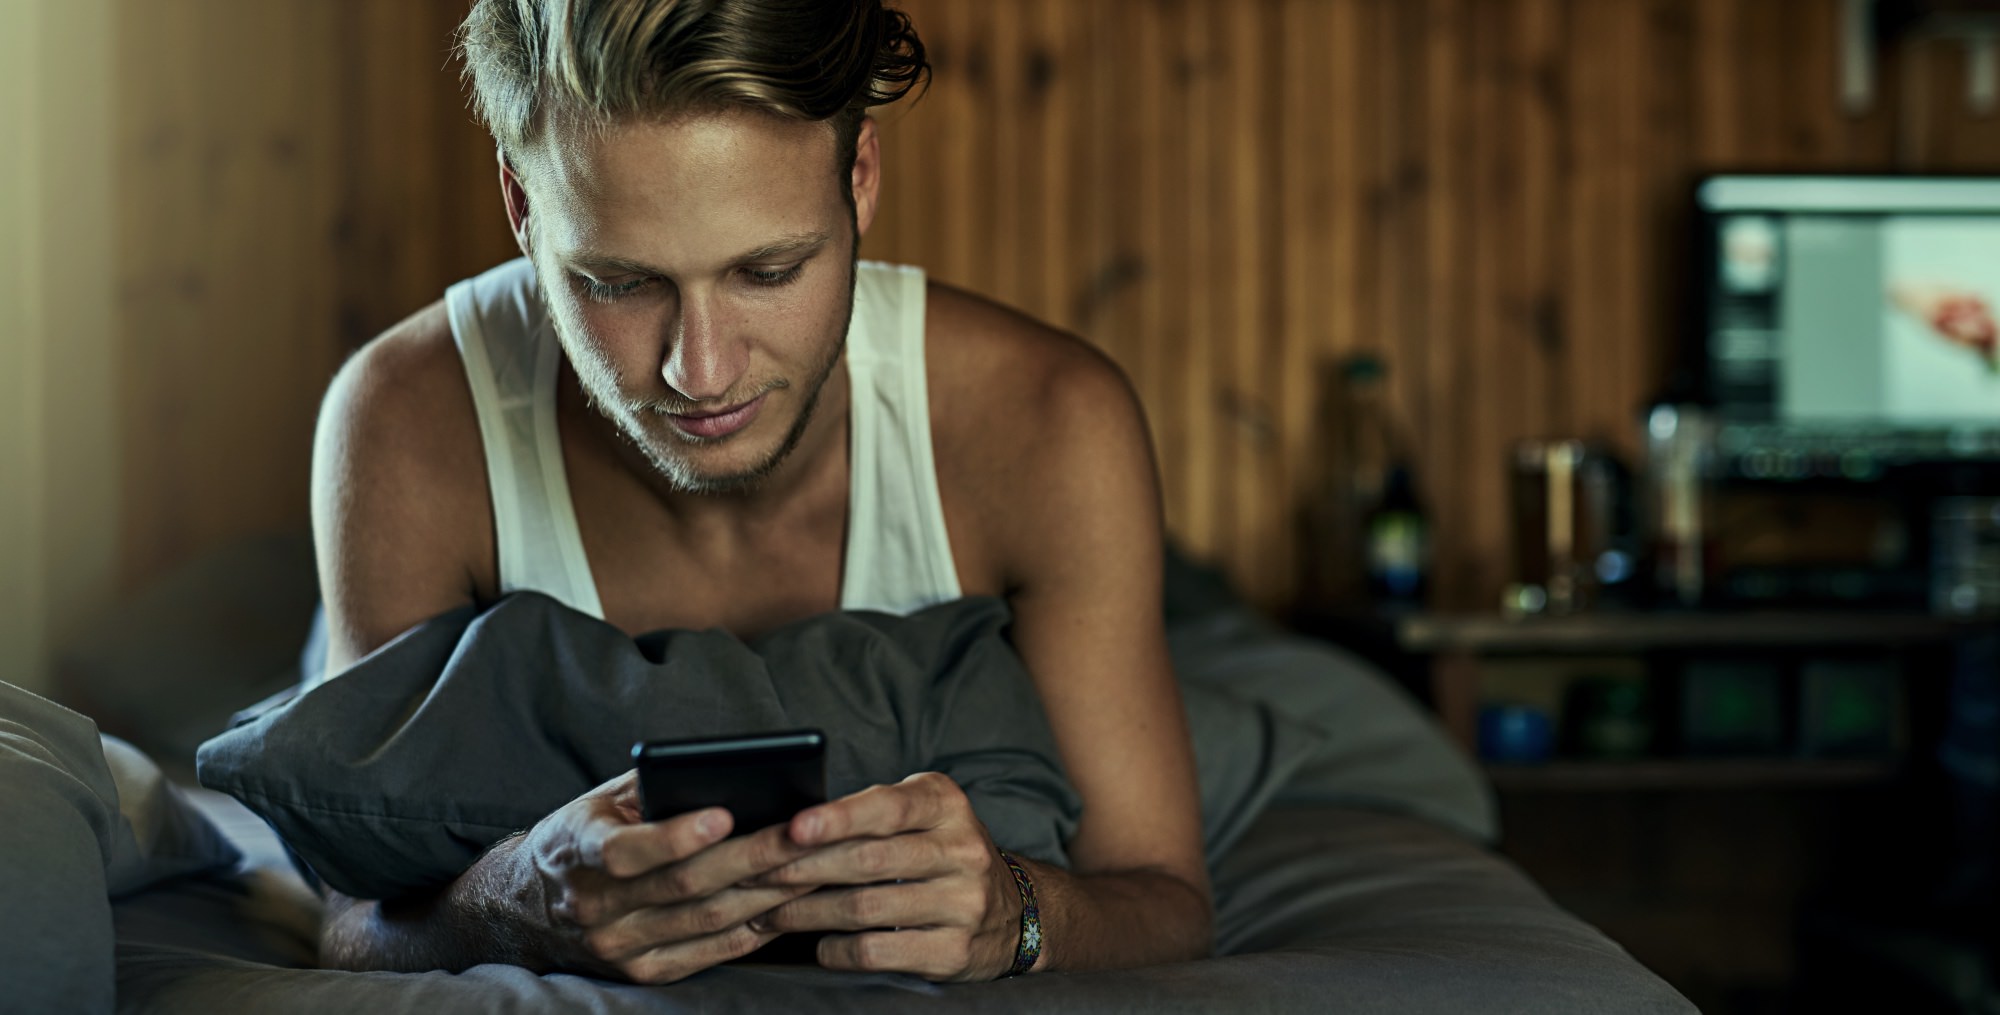 guy-in-bed-boy-man-looking-at-phone-iphone-porn-kills-love